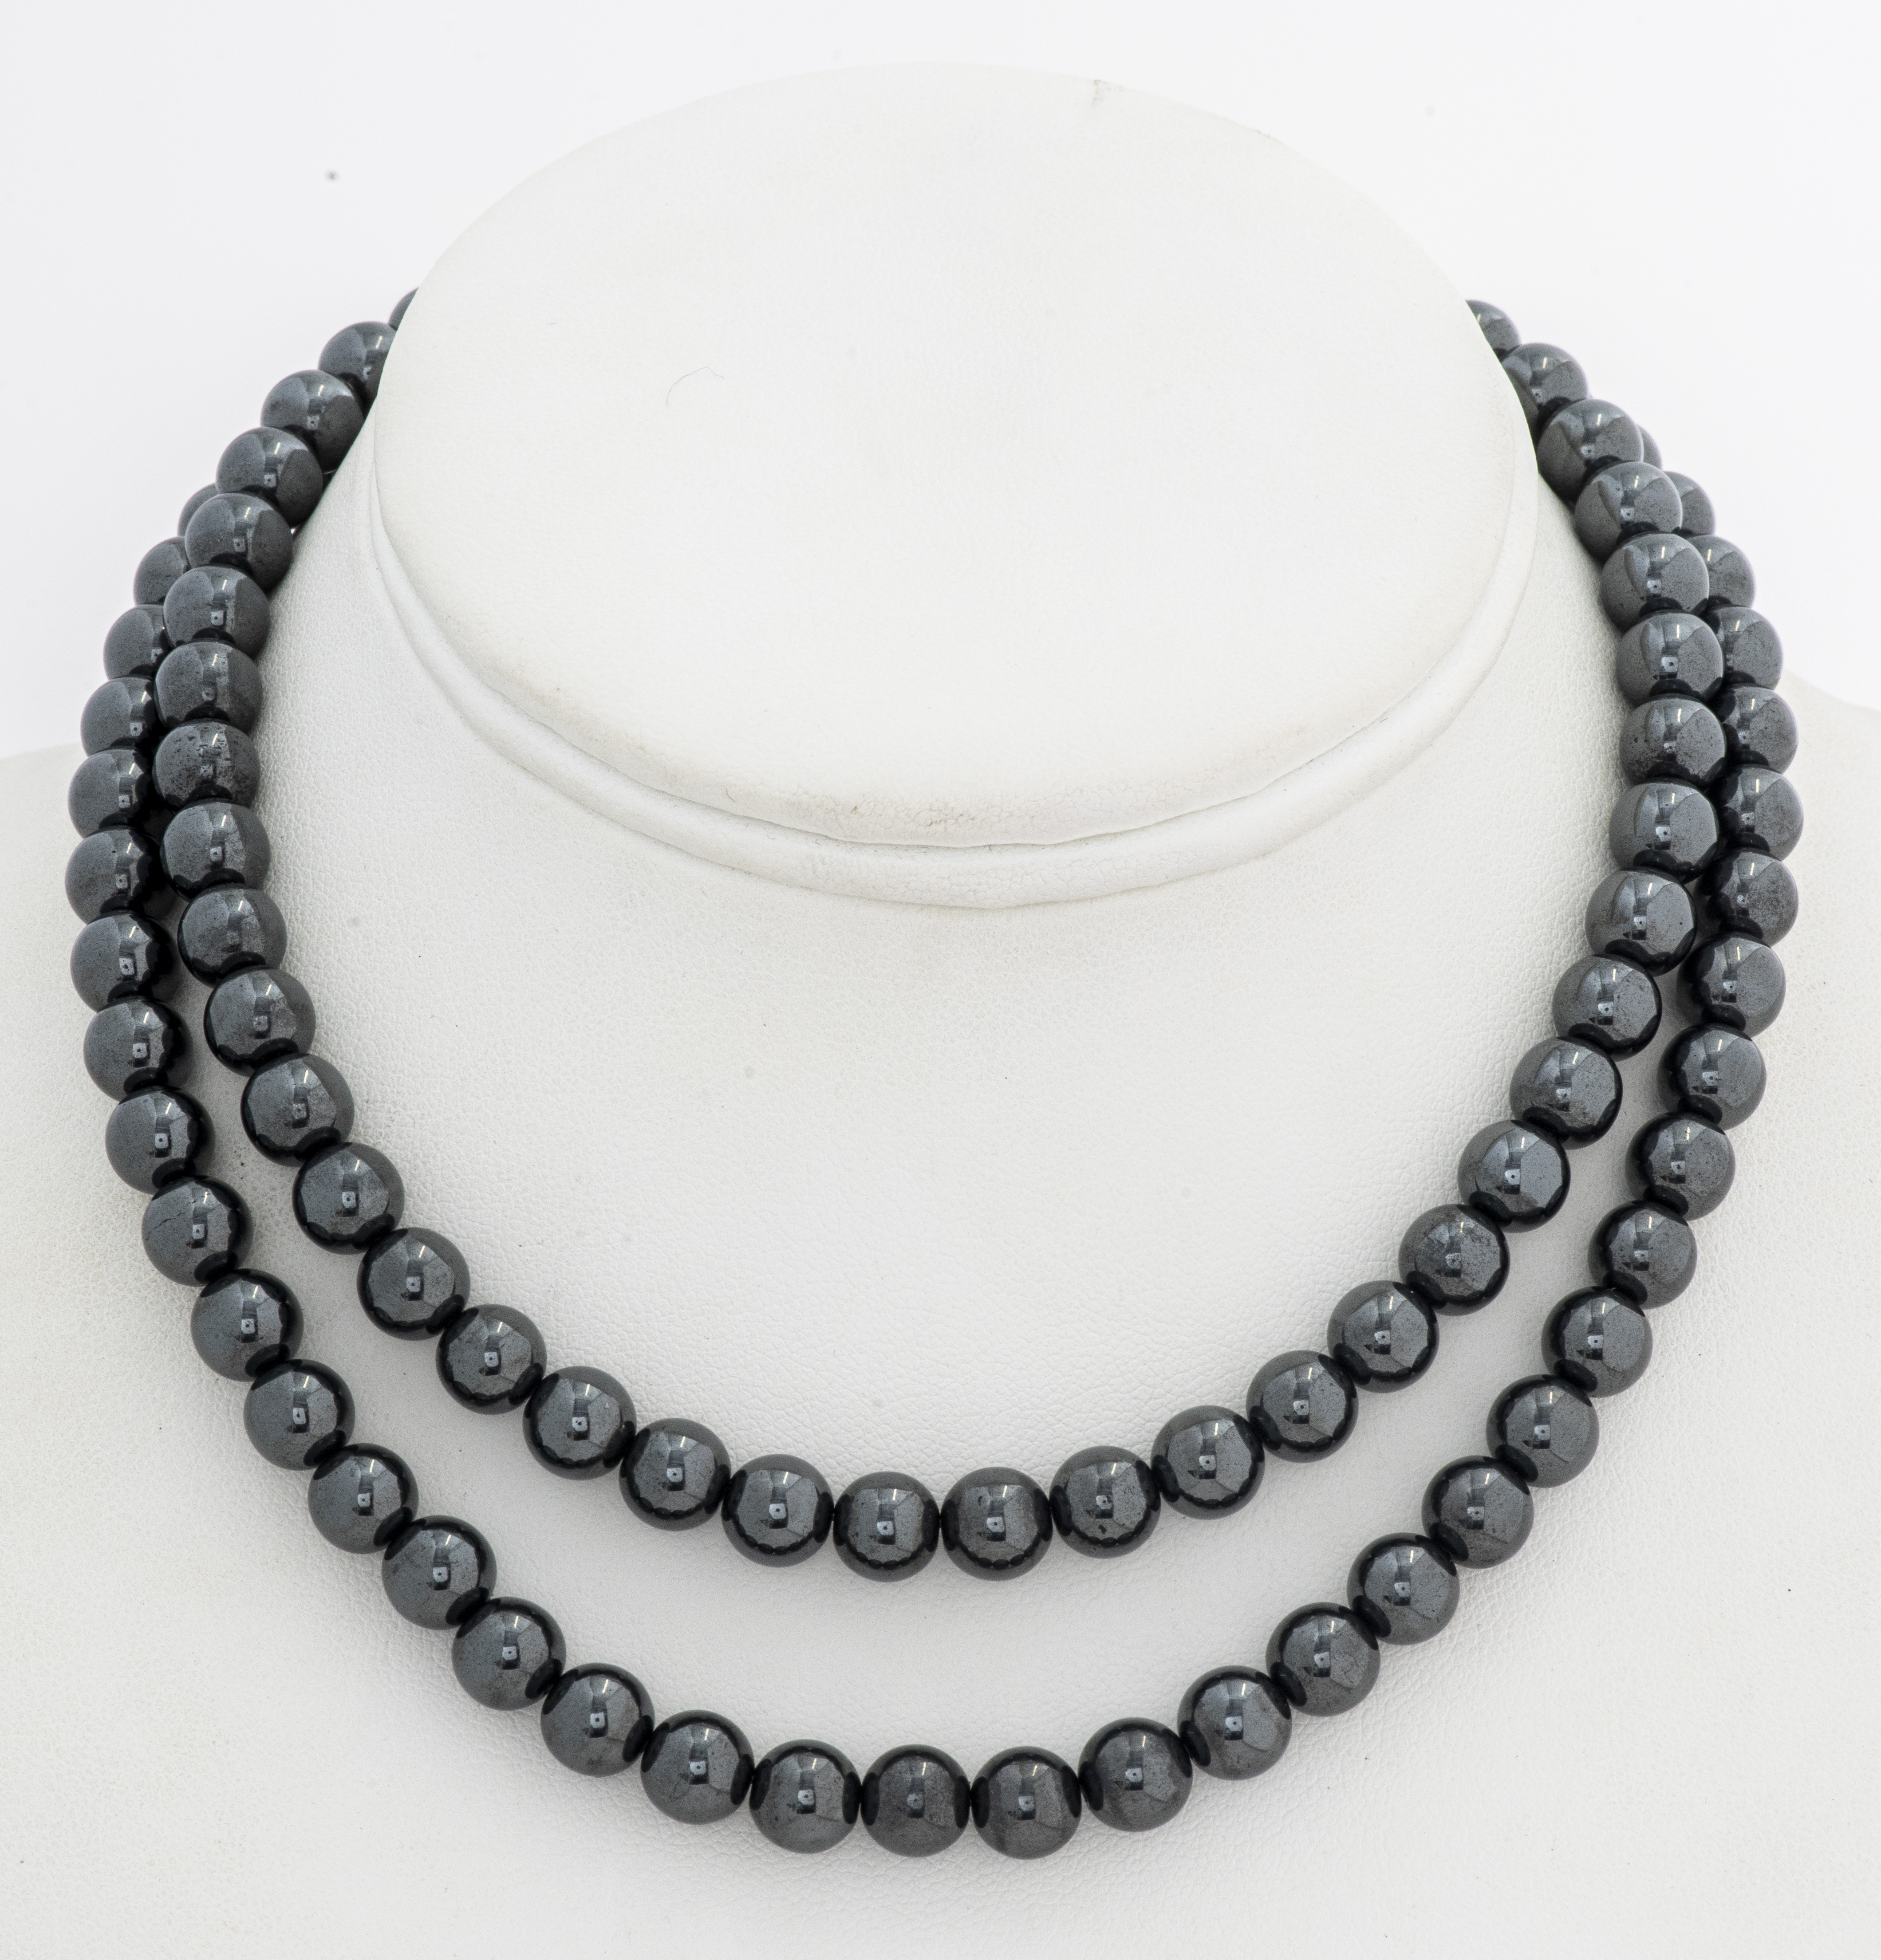 HEMATITE BEAD NECKLACE WITH SILVER TONE 363c61